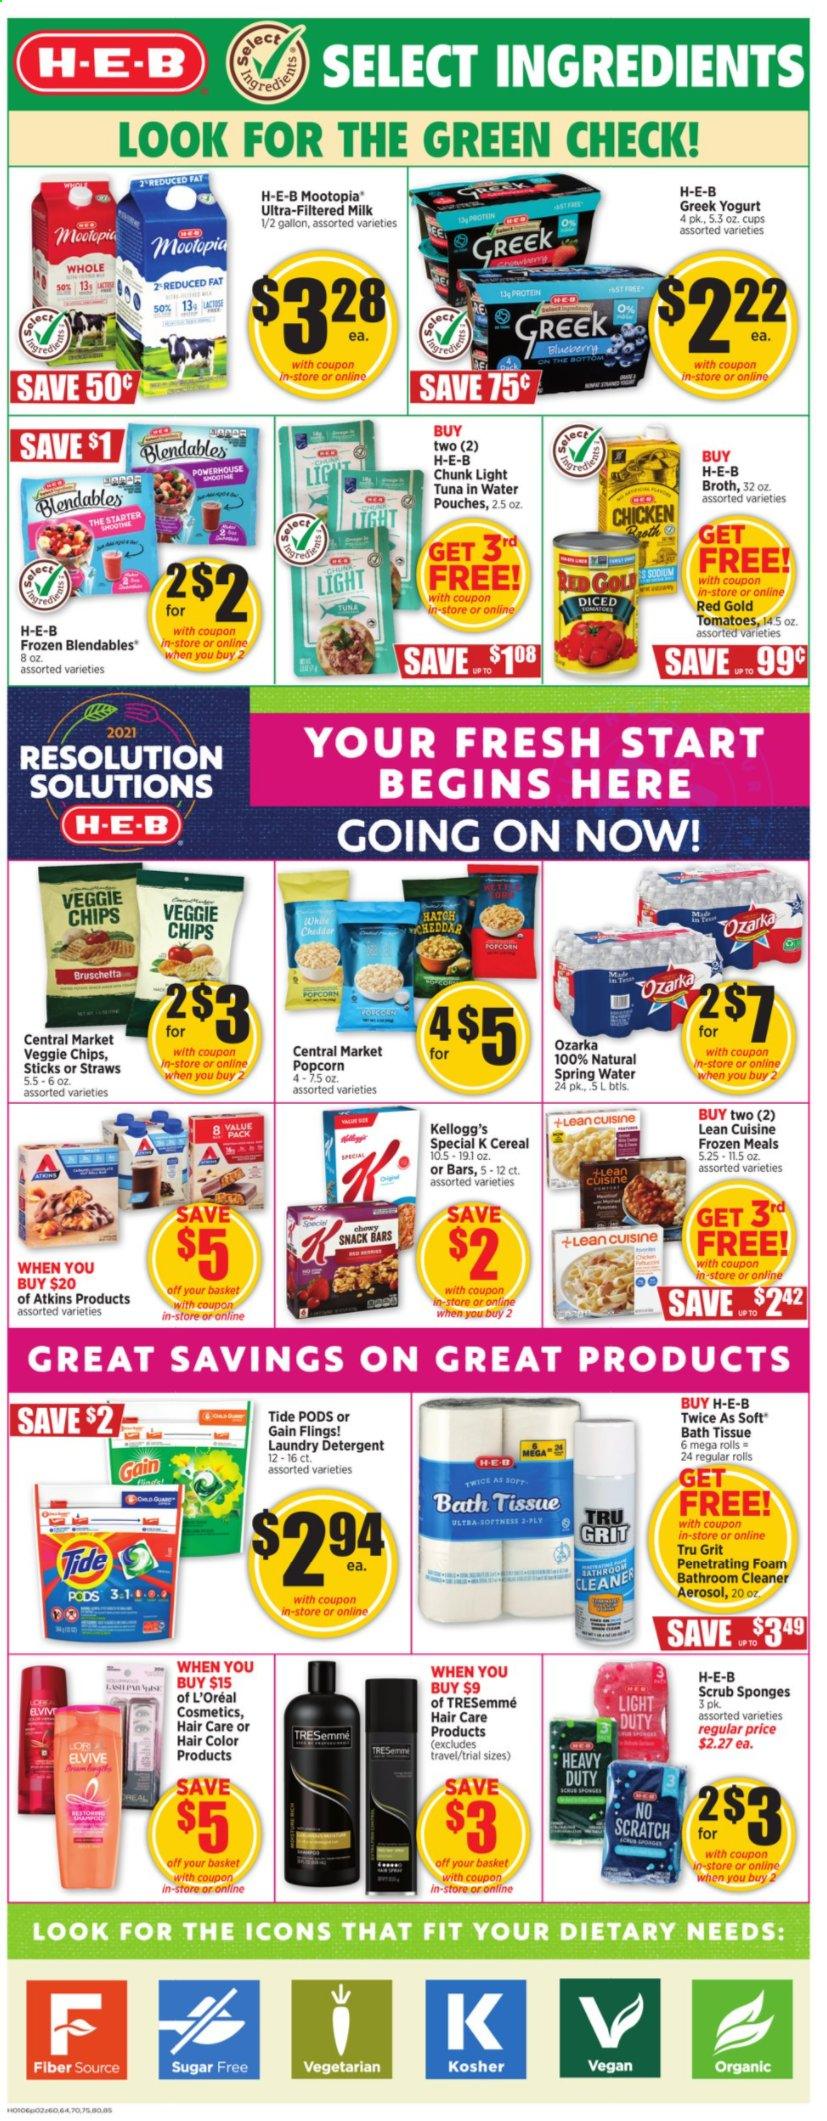 thumbnail - H-E-B Flyer - 01/06/2021 - 01/12/2021 - Sales products - tuna, Lean Cuisine, greek yoghurt, yoghurt, milk, Kellogg's, snack bar, snack, popcorn, broth, tuna in water, light tuna, cereals, spring water, L'Or, bath tissue, detergent, Gain, cleaner, Tide, laundry detergent, L’Oréal, TRESemmé, hair color, sponge, cup, straw. Page 2.